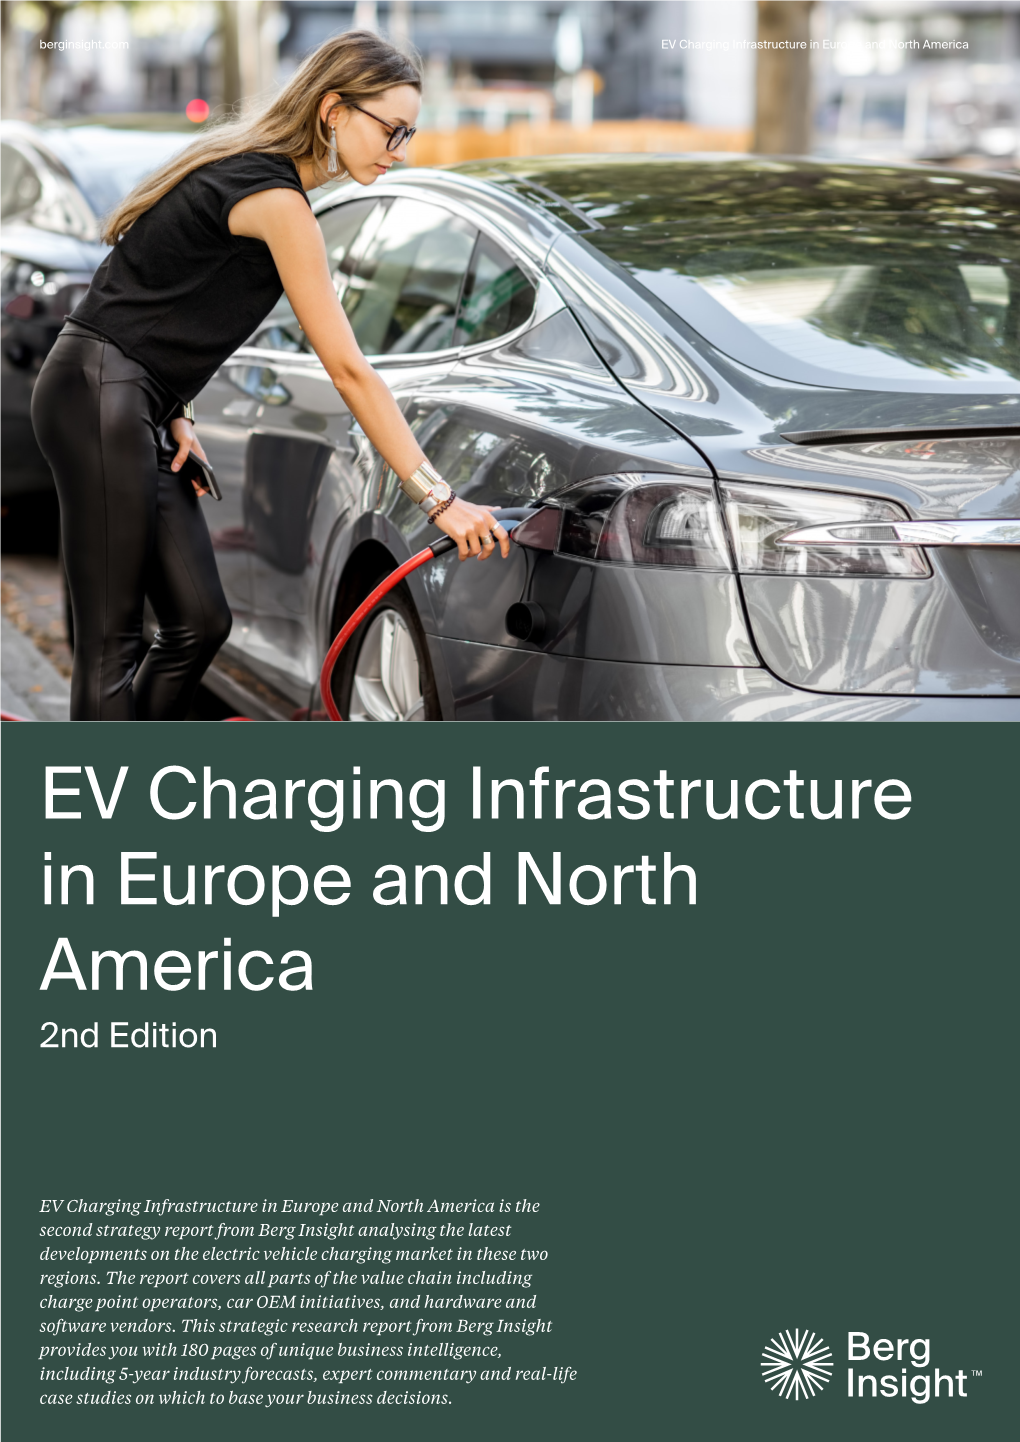 EV Charging Infrastructure in Europe and North America